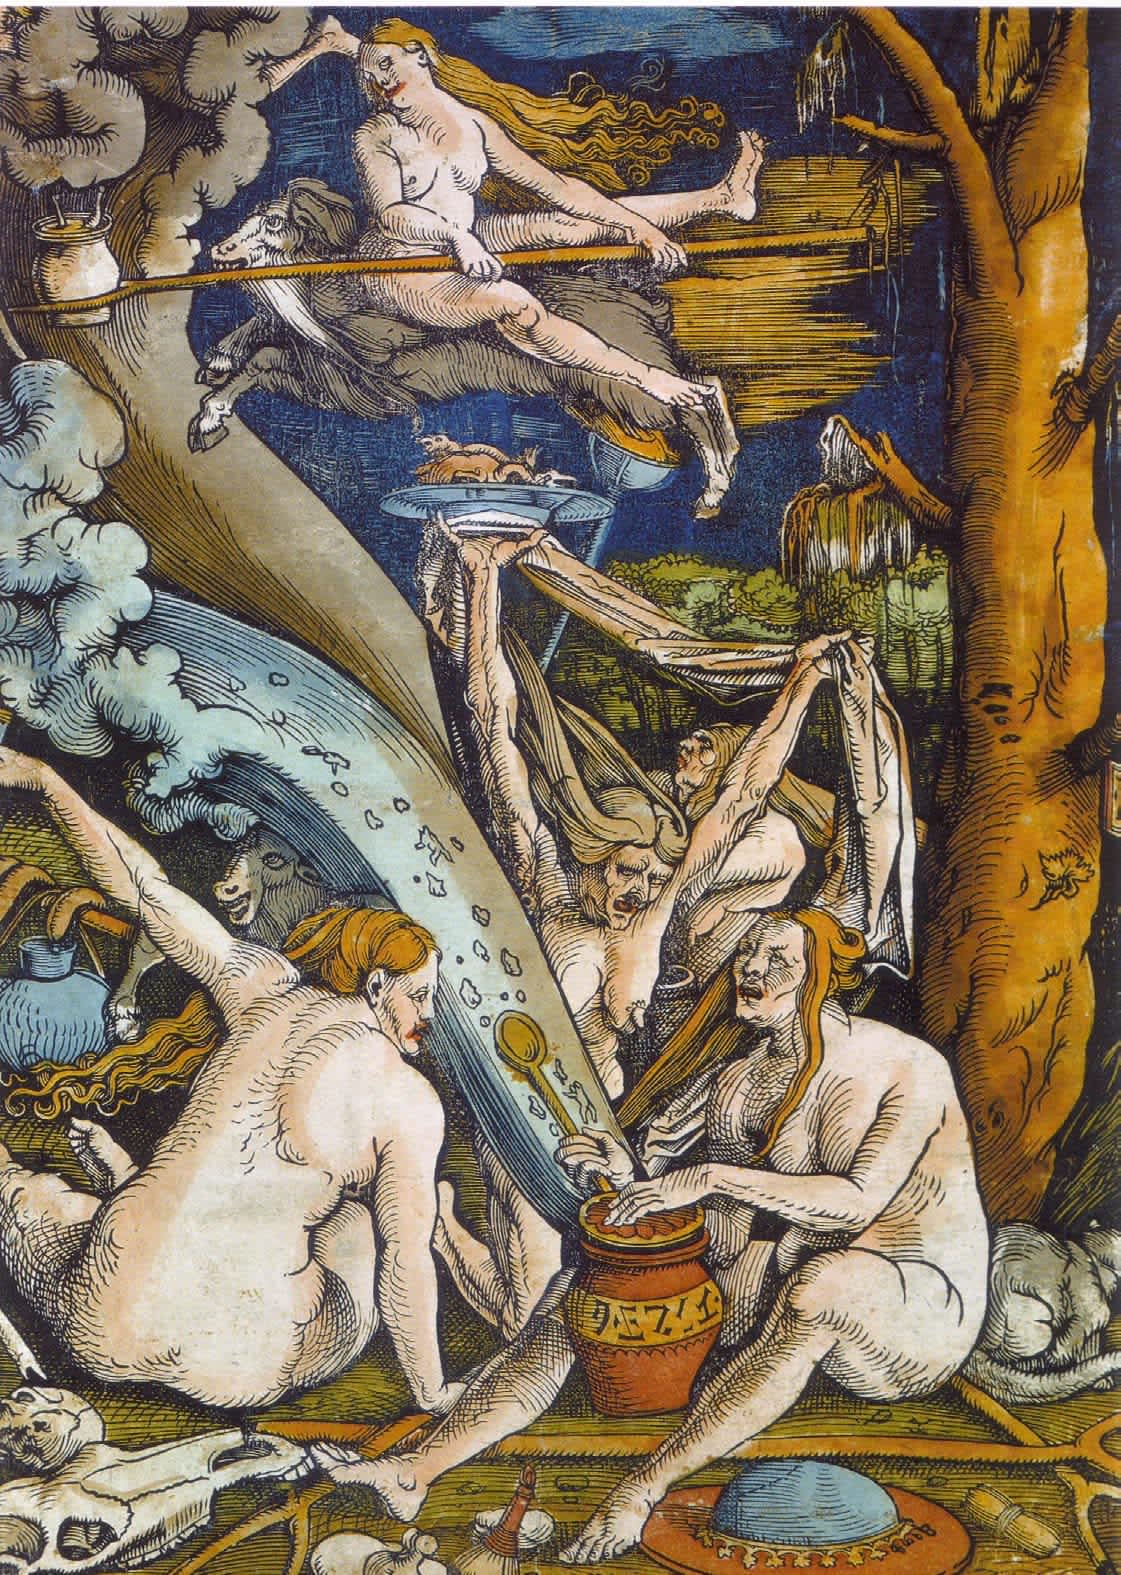  ‘Witches’ by Hans Baldung, a woodcut from 1508.